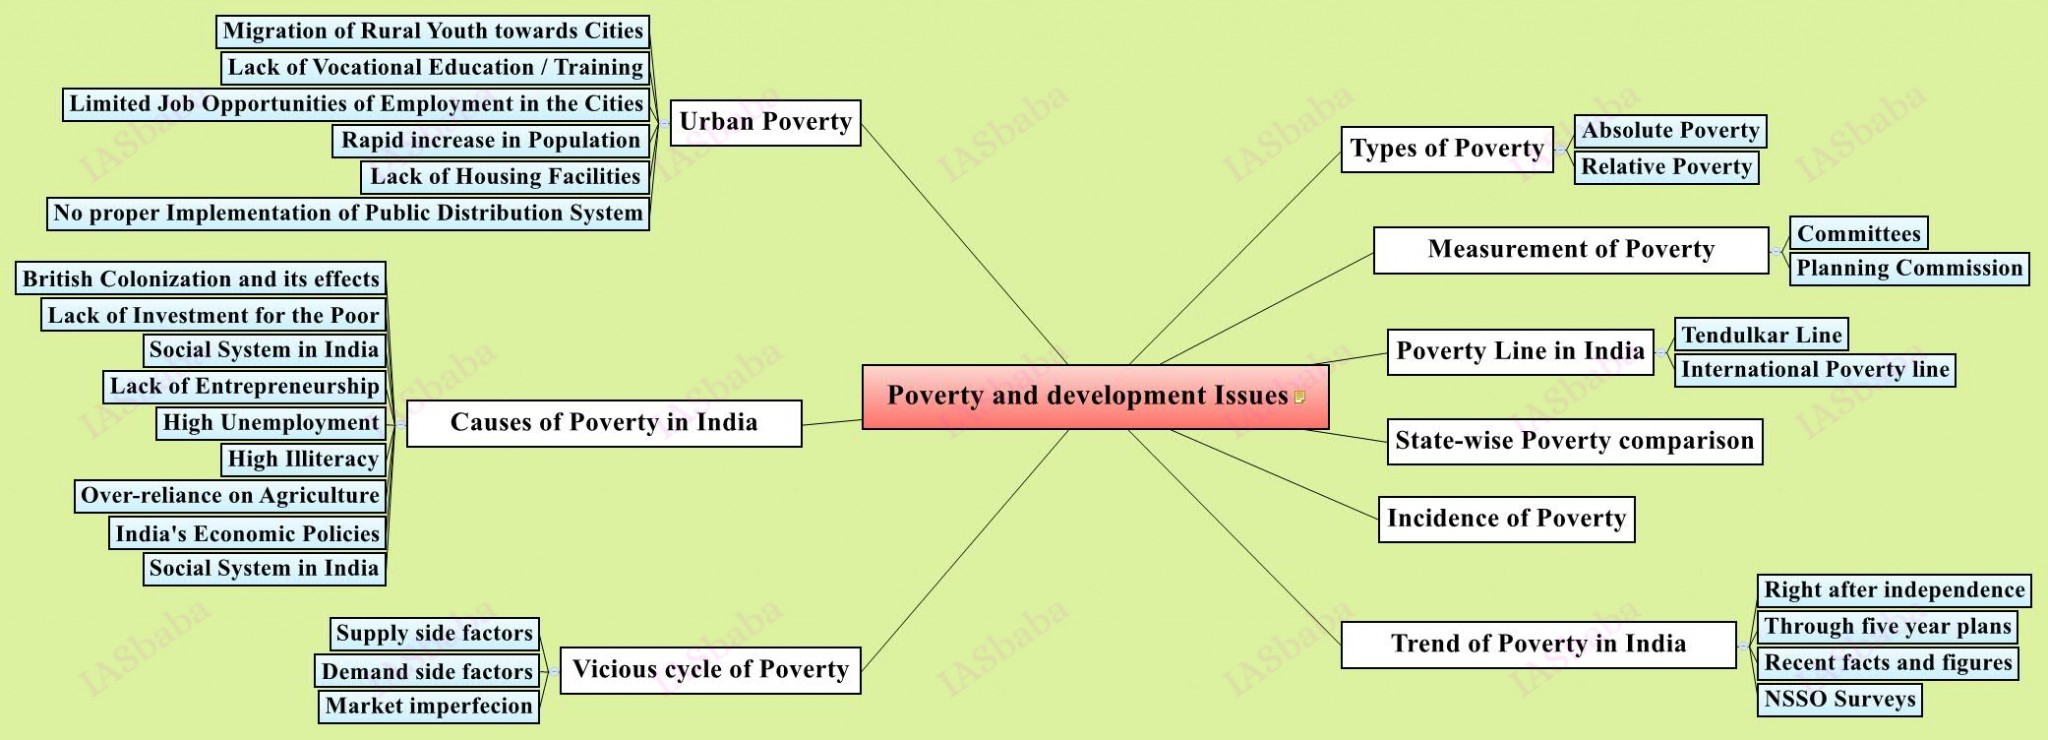 Poverty and development Issues